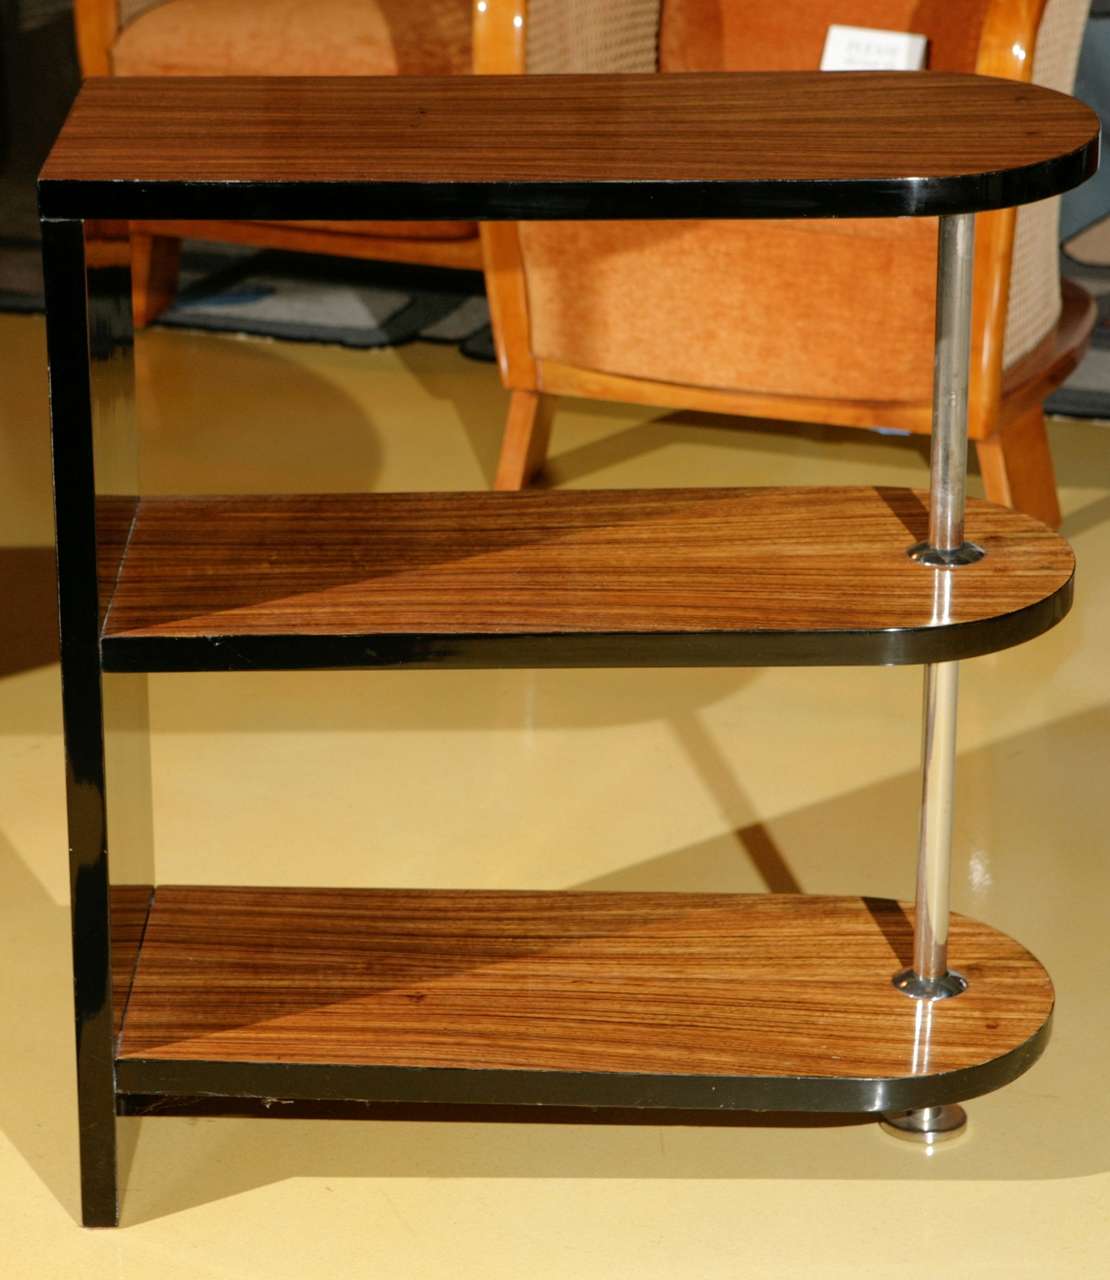 Modernist, three layer shelf-unit, part of suite of pieces by Farago & Grof. Onde of a kind left from suite.